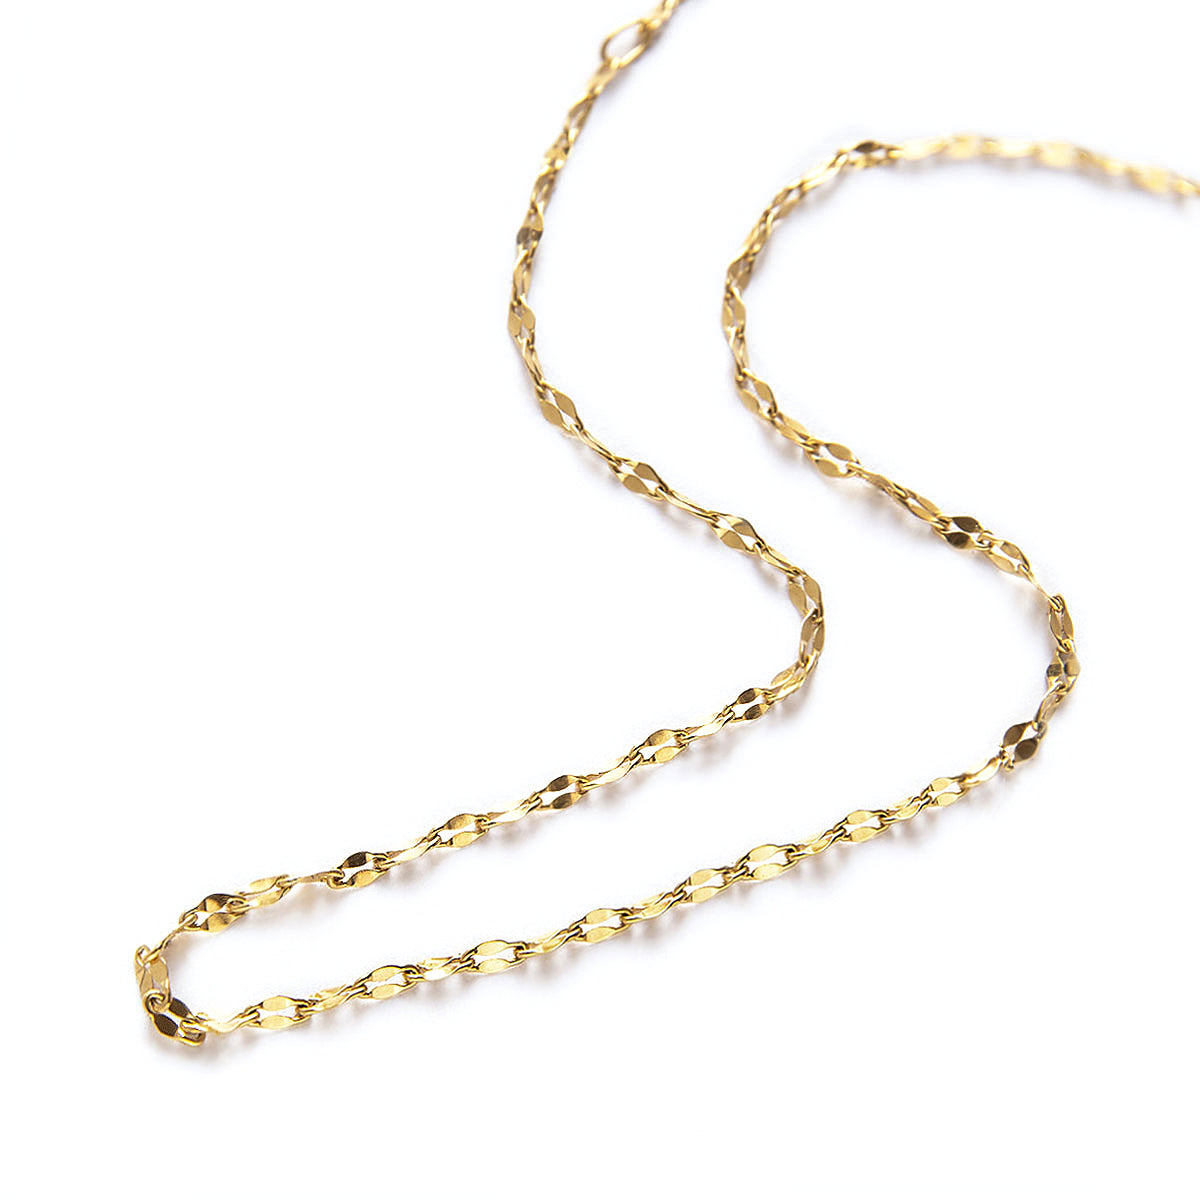 Women's Cryshimmer Layered Gold Choker Necklace